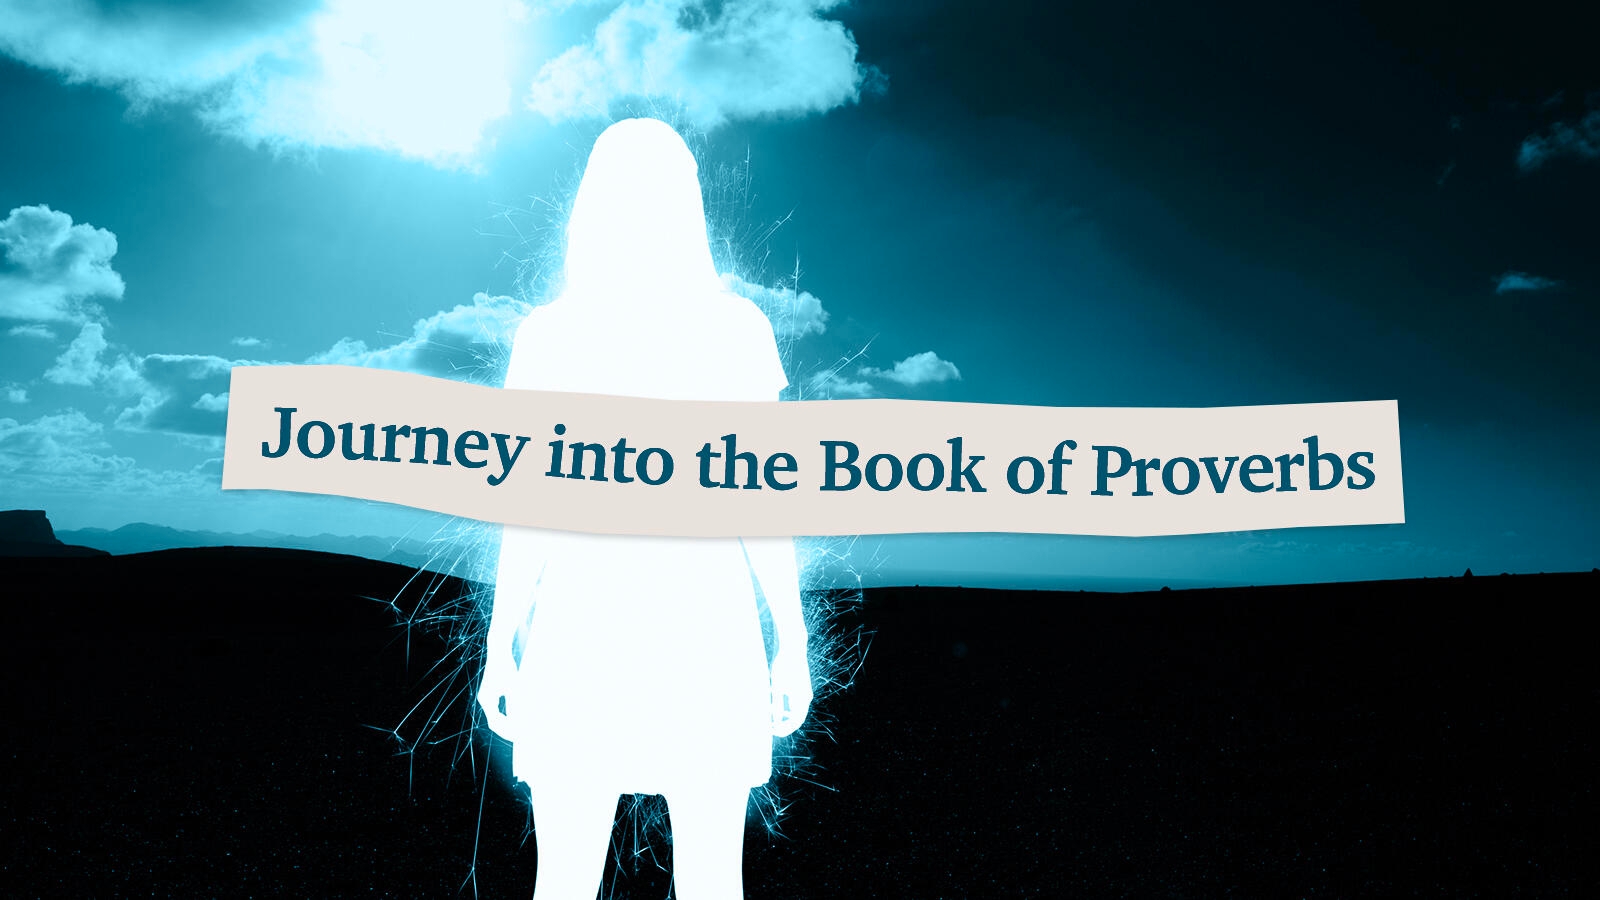 Journey into the Book of Proverbs